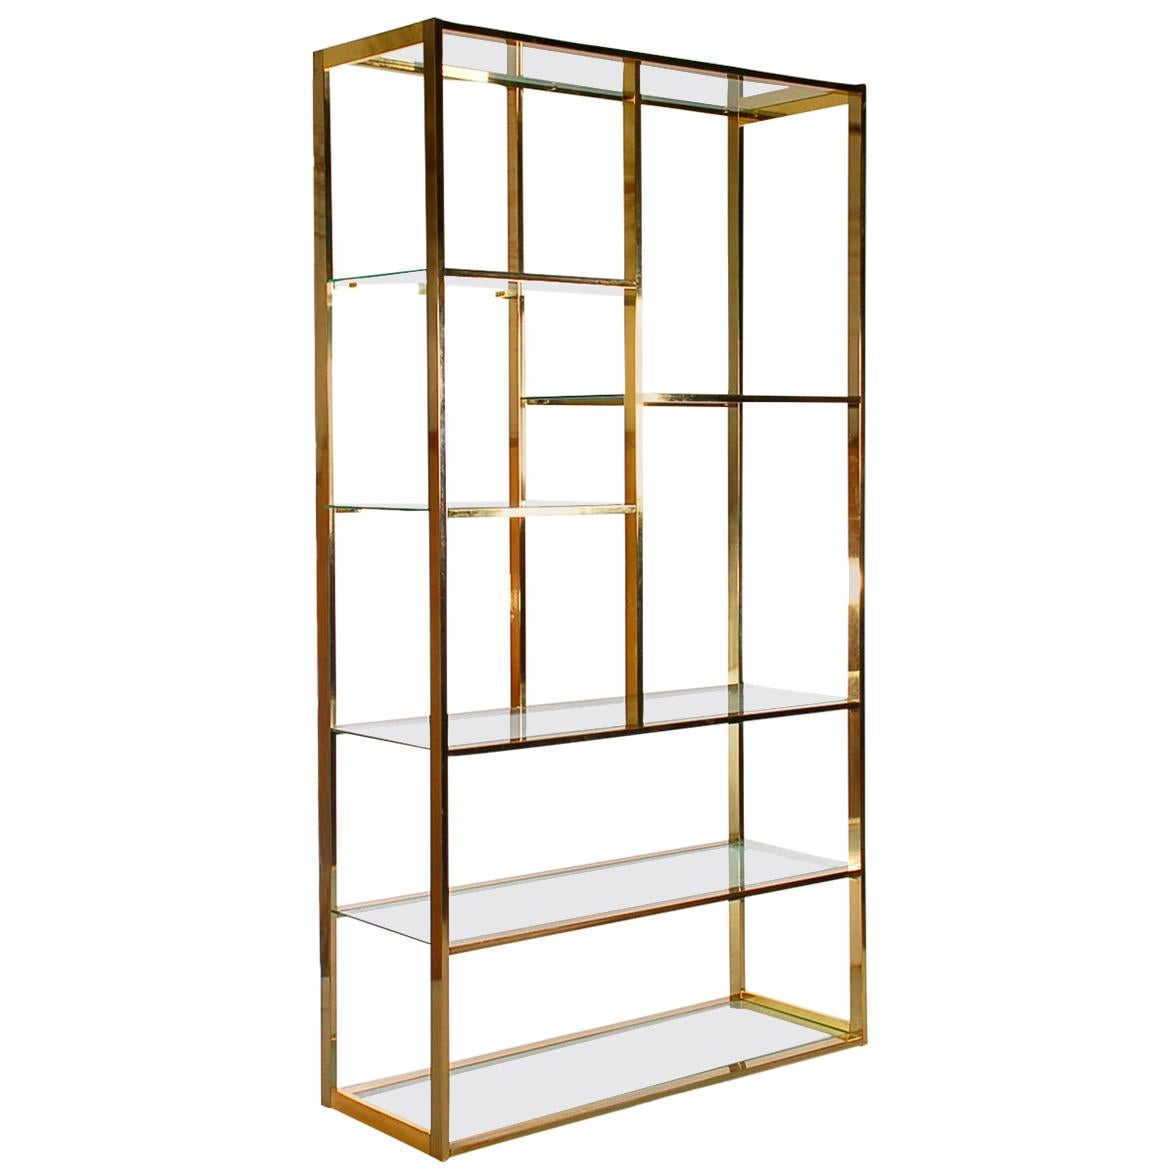 Hollywood Regency Brass and Glass Wall Unit or Shelving Unit after Milo Baughman